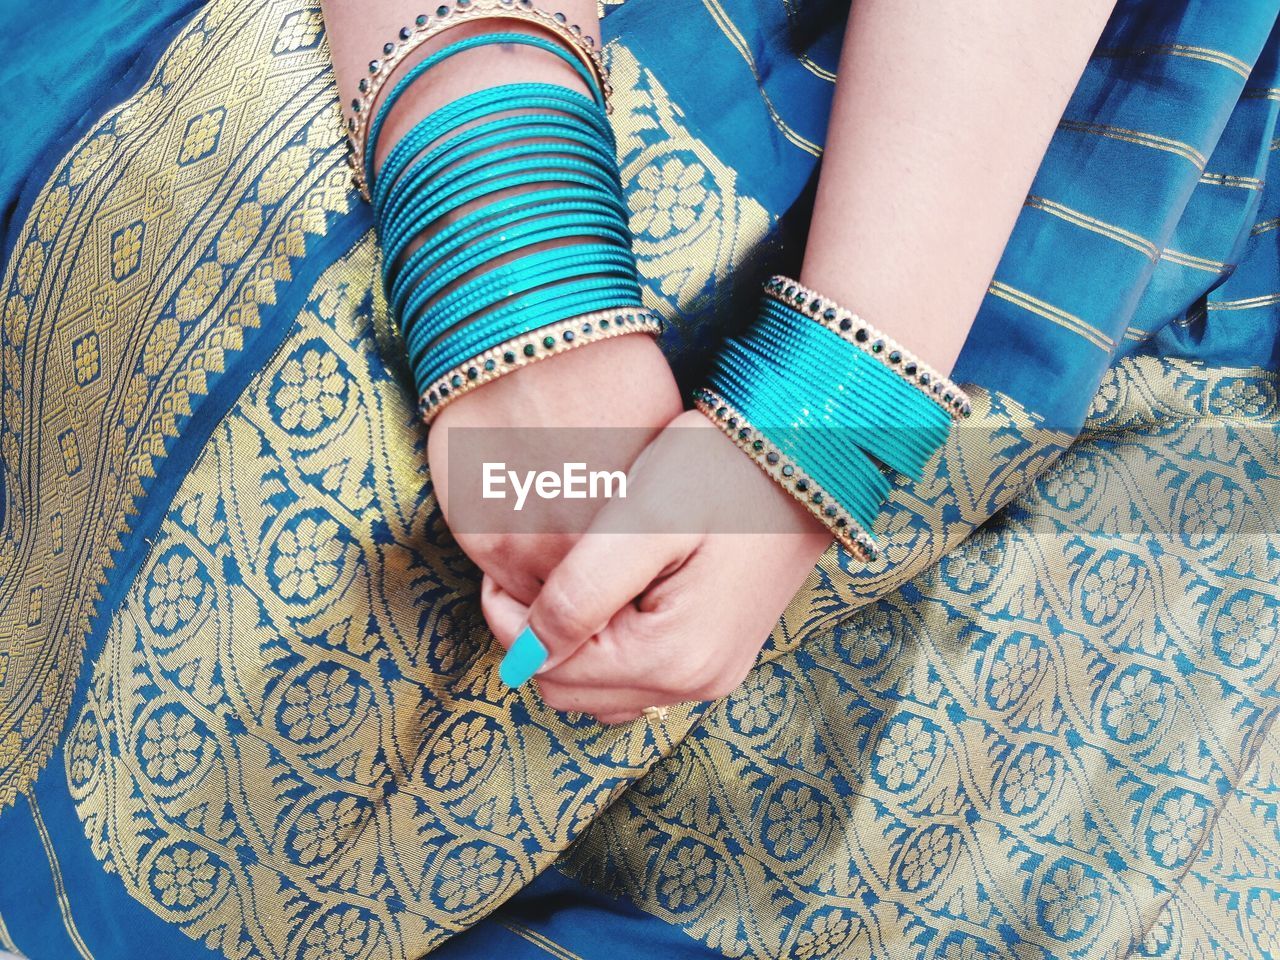 Midsection of woman in blue sari and bangles